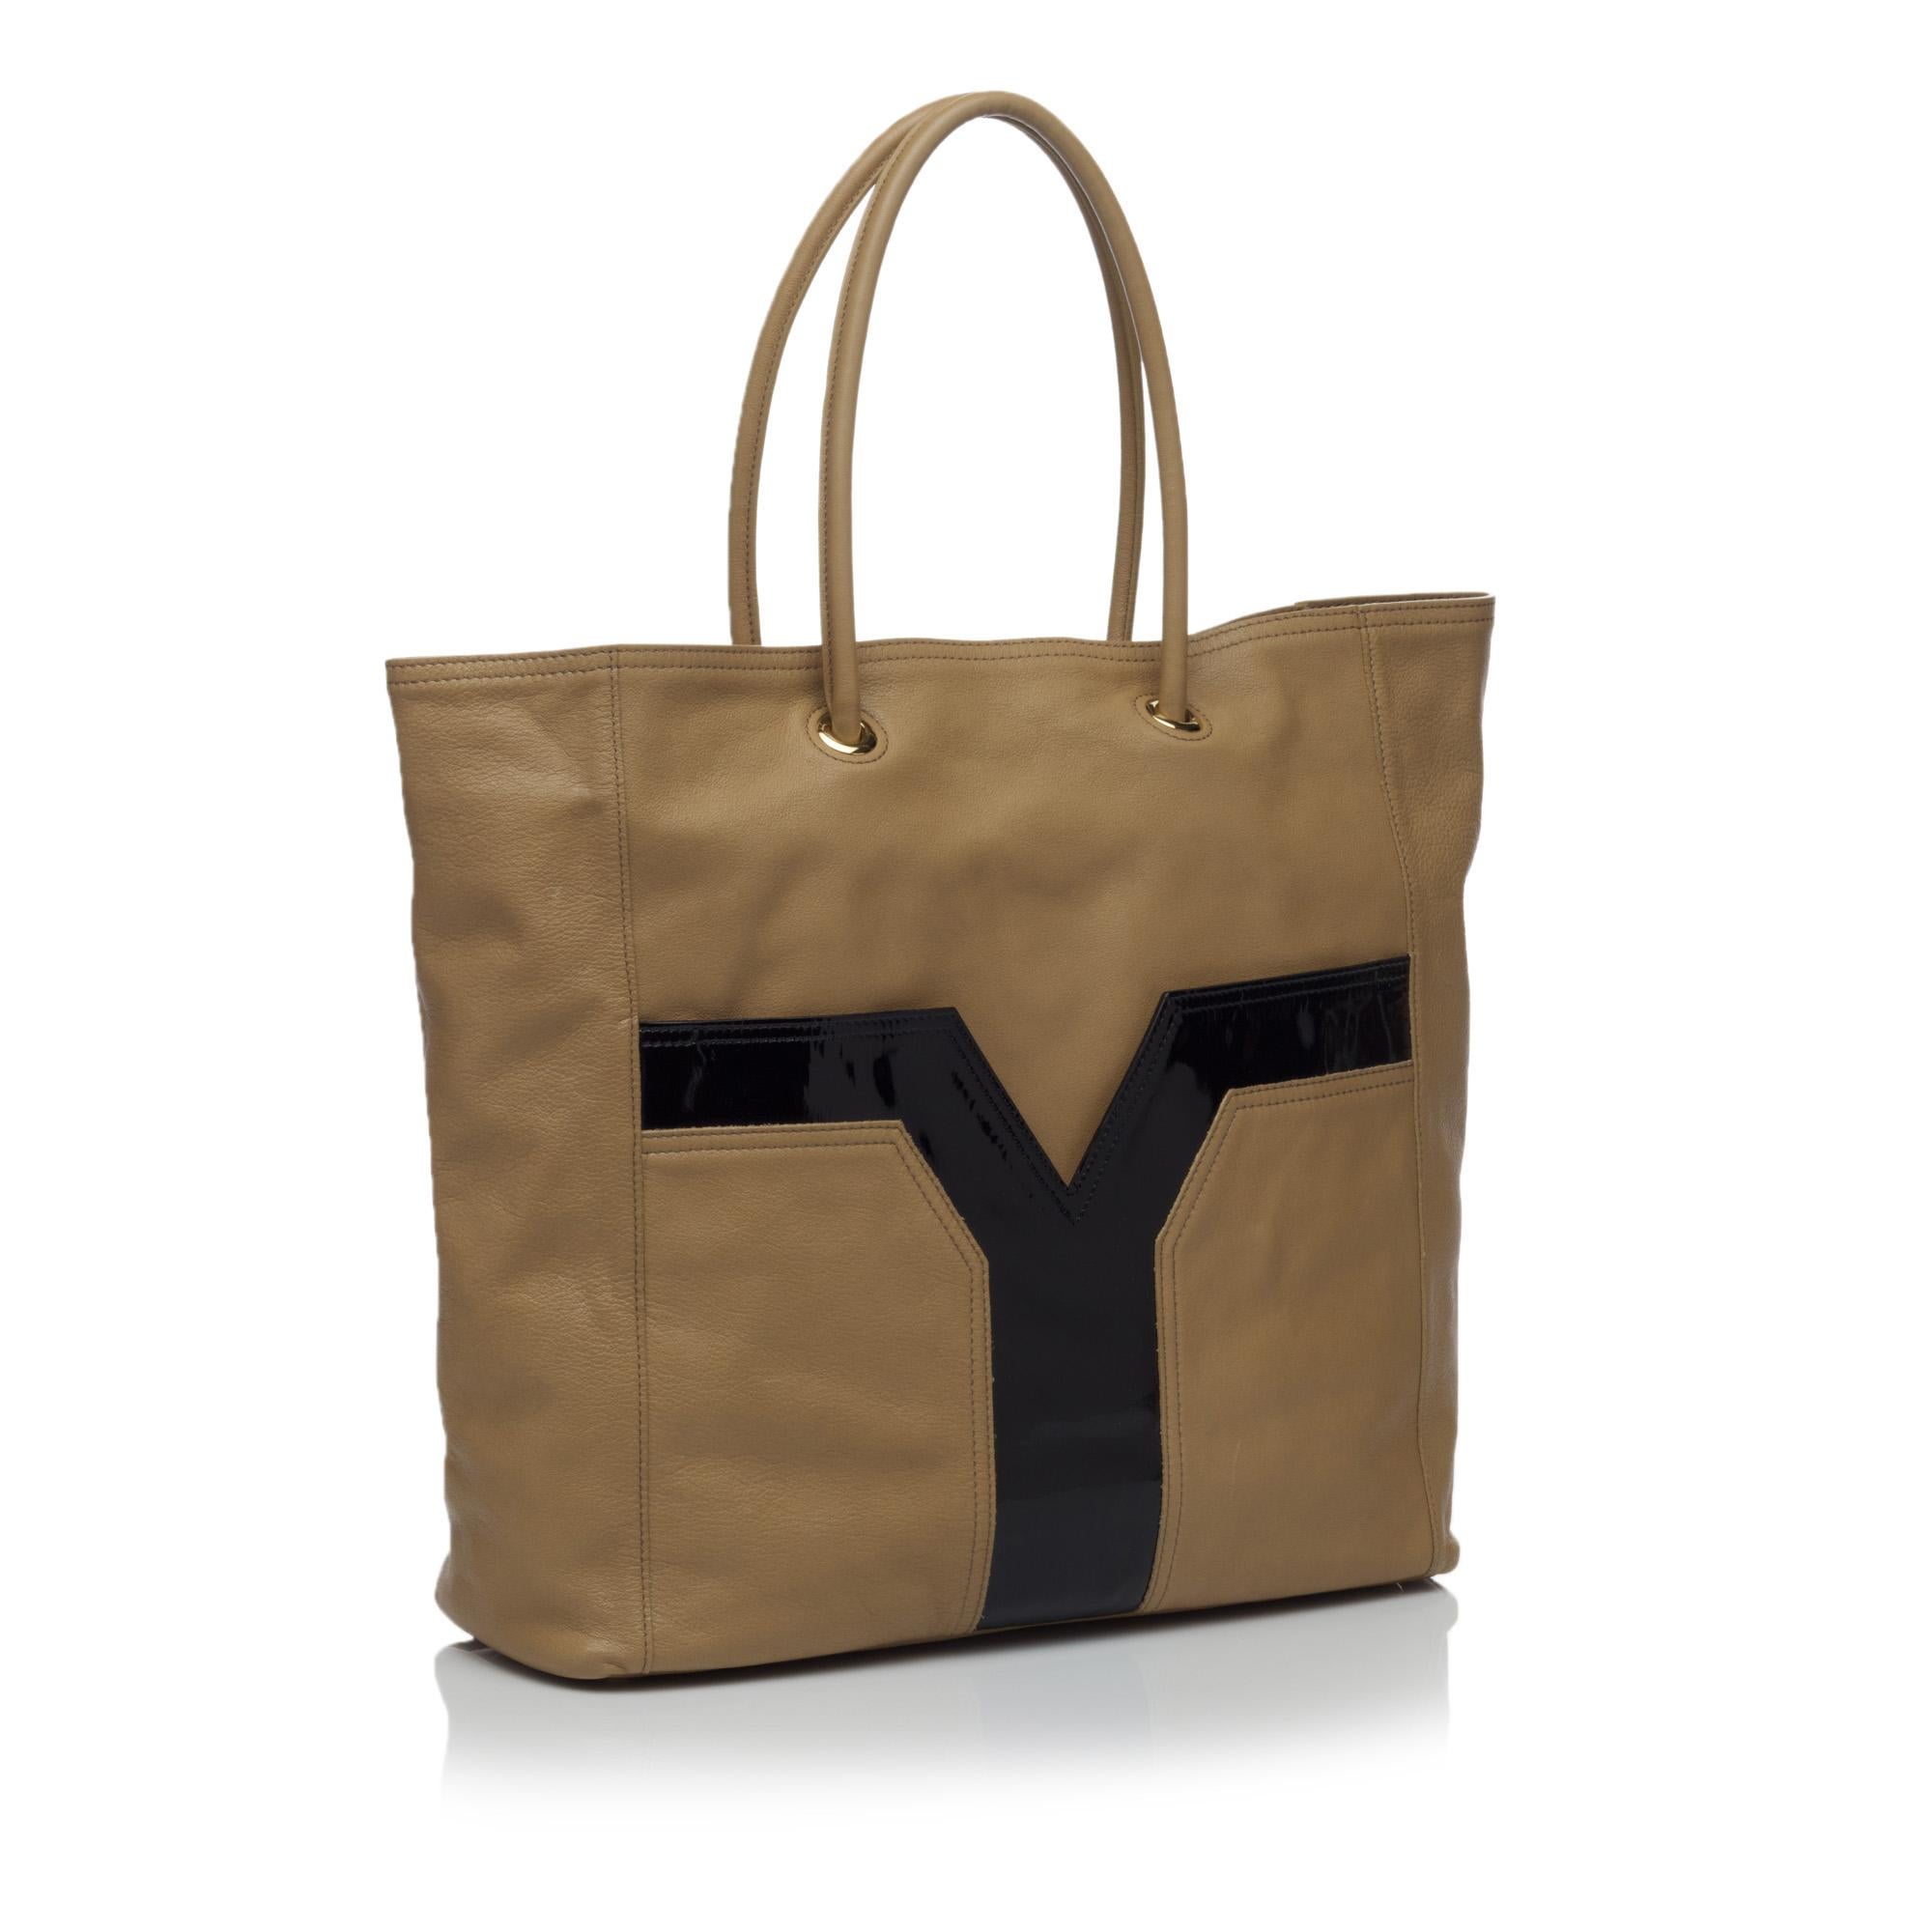 The Lucky Chyc tote features a leather body with a patent leather detail, an open top, and interior flap pockets. It carries as AB condition rating.

Inclusions: 
Dust Bag
Authenticity Card

Dimensions:
Length: 34.00 cm
Width: 32.00 cm
Depth: 11.00